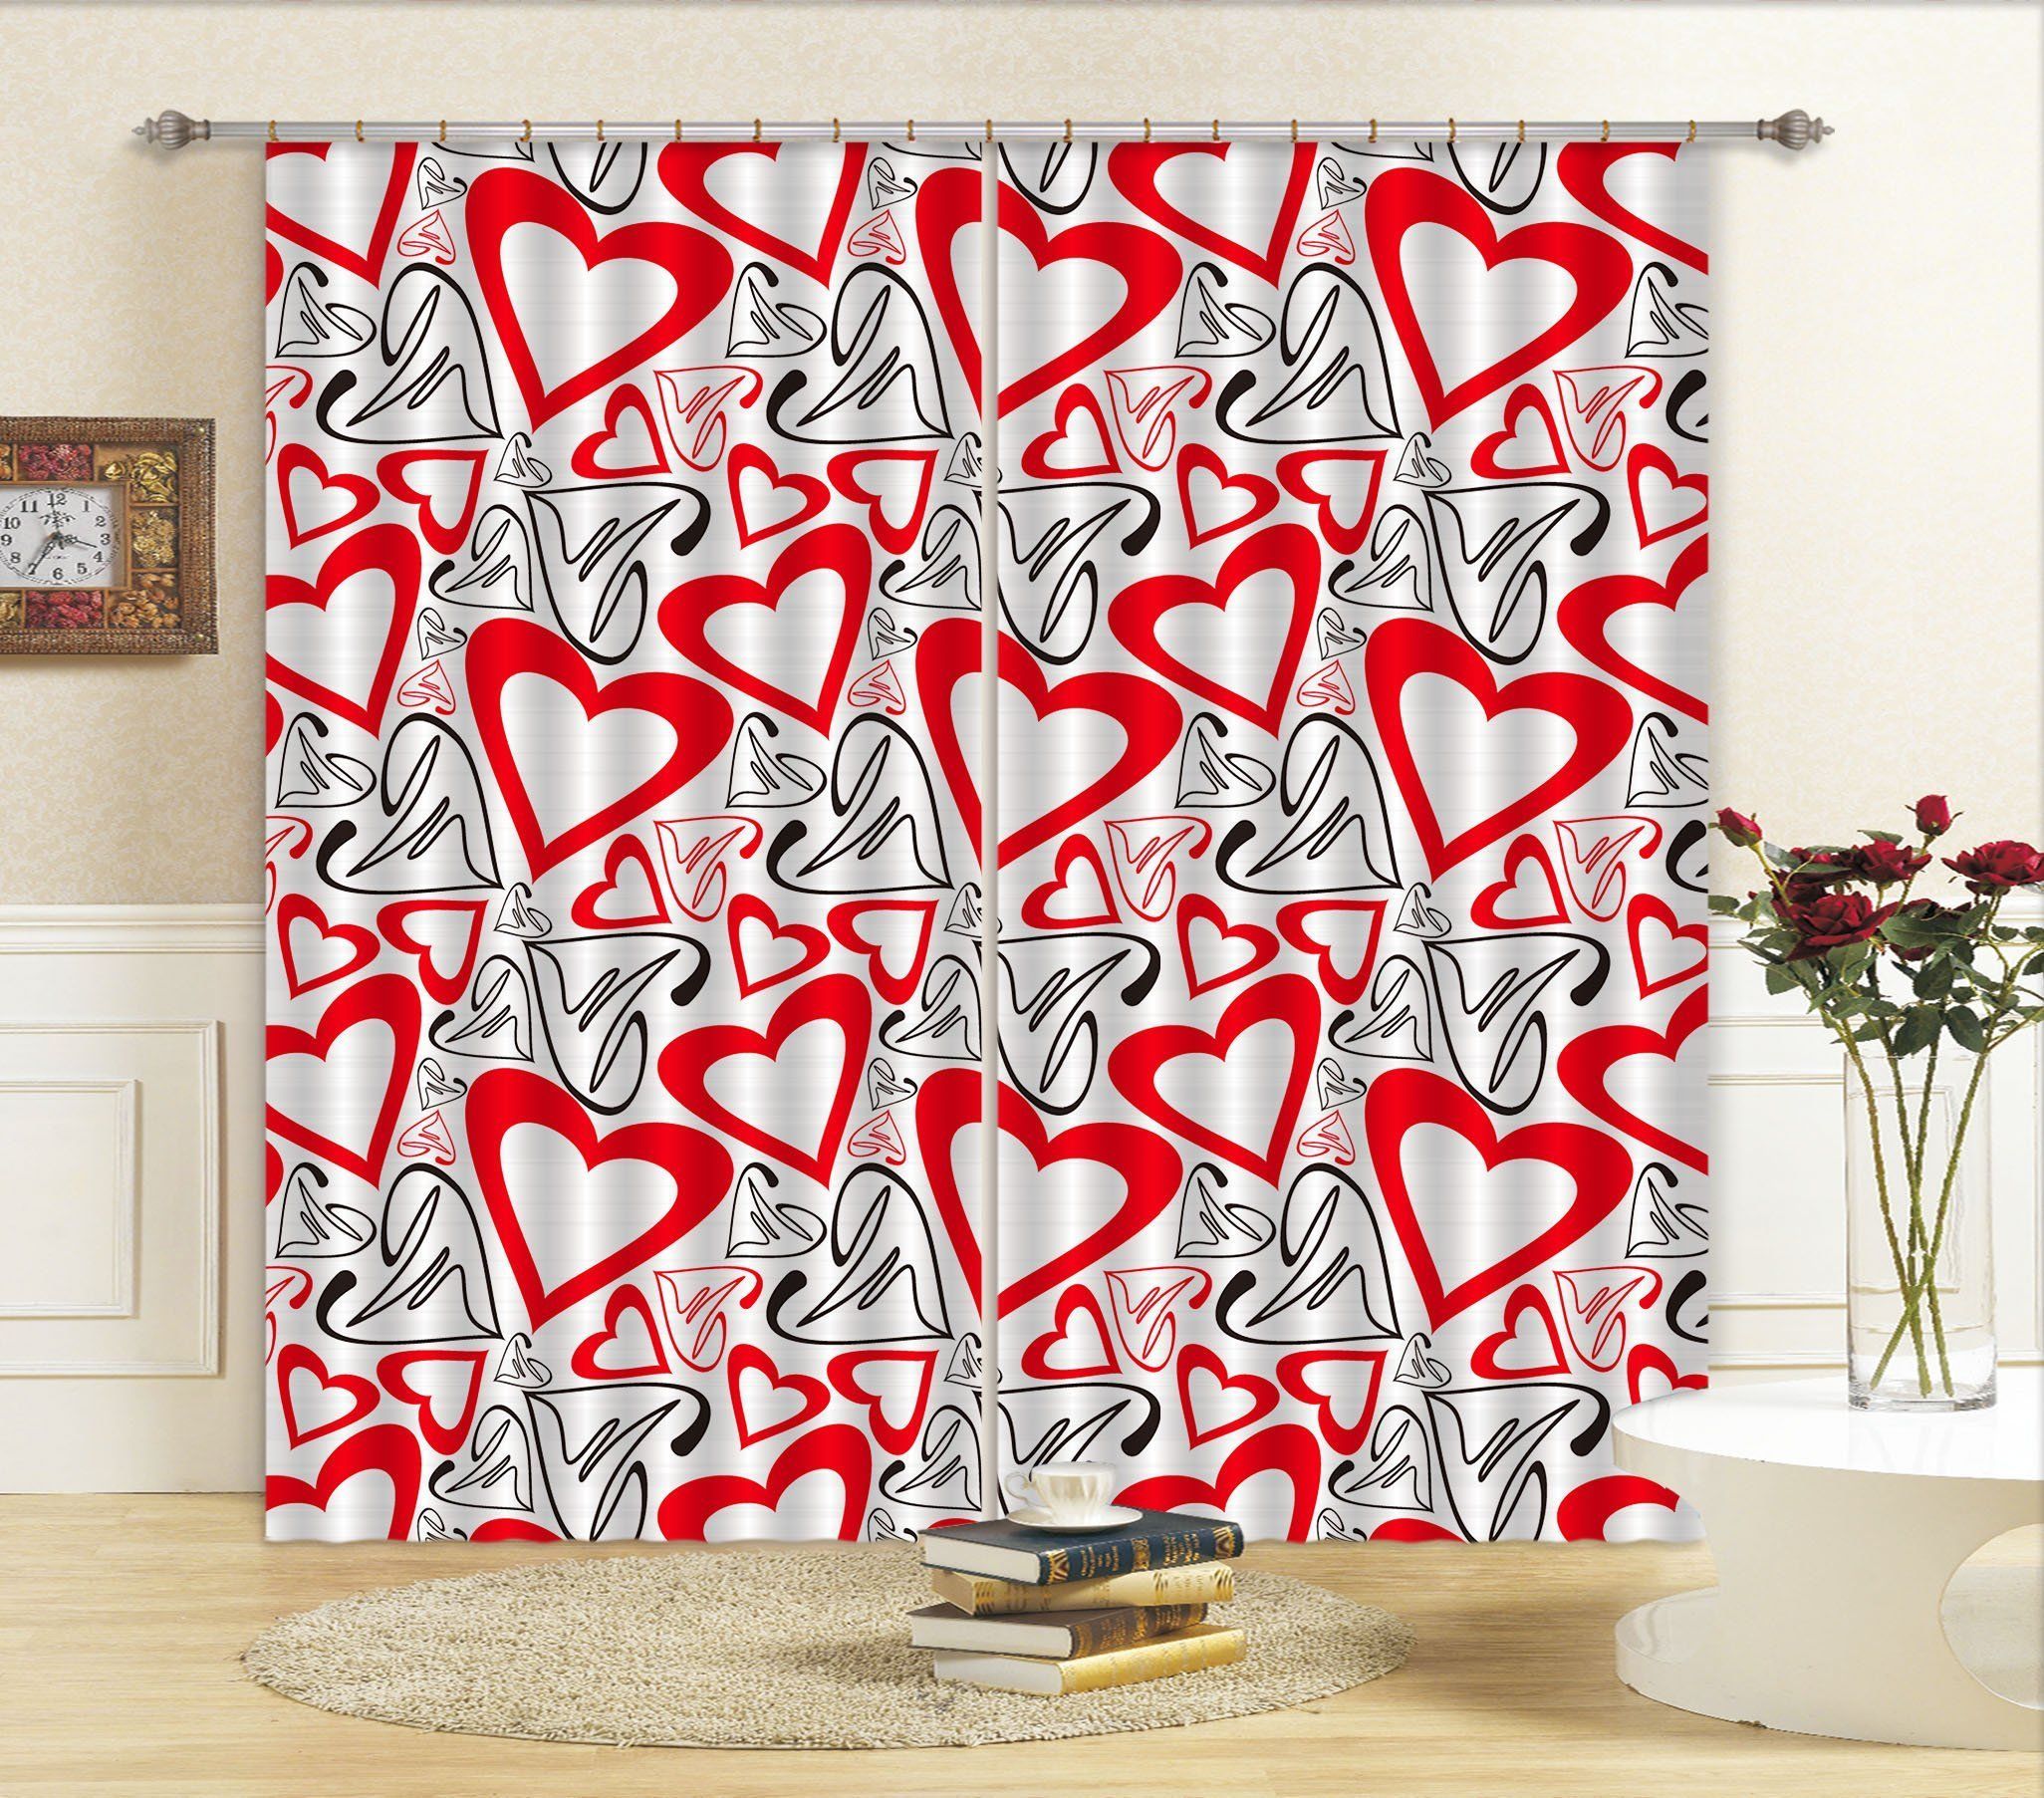 Romantic Red Hearts Dots Printed Window Curtain